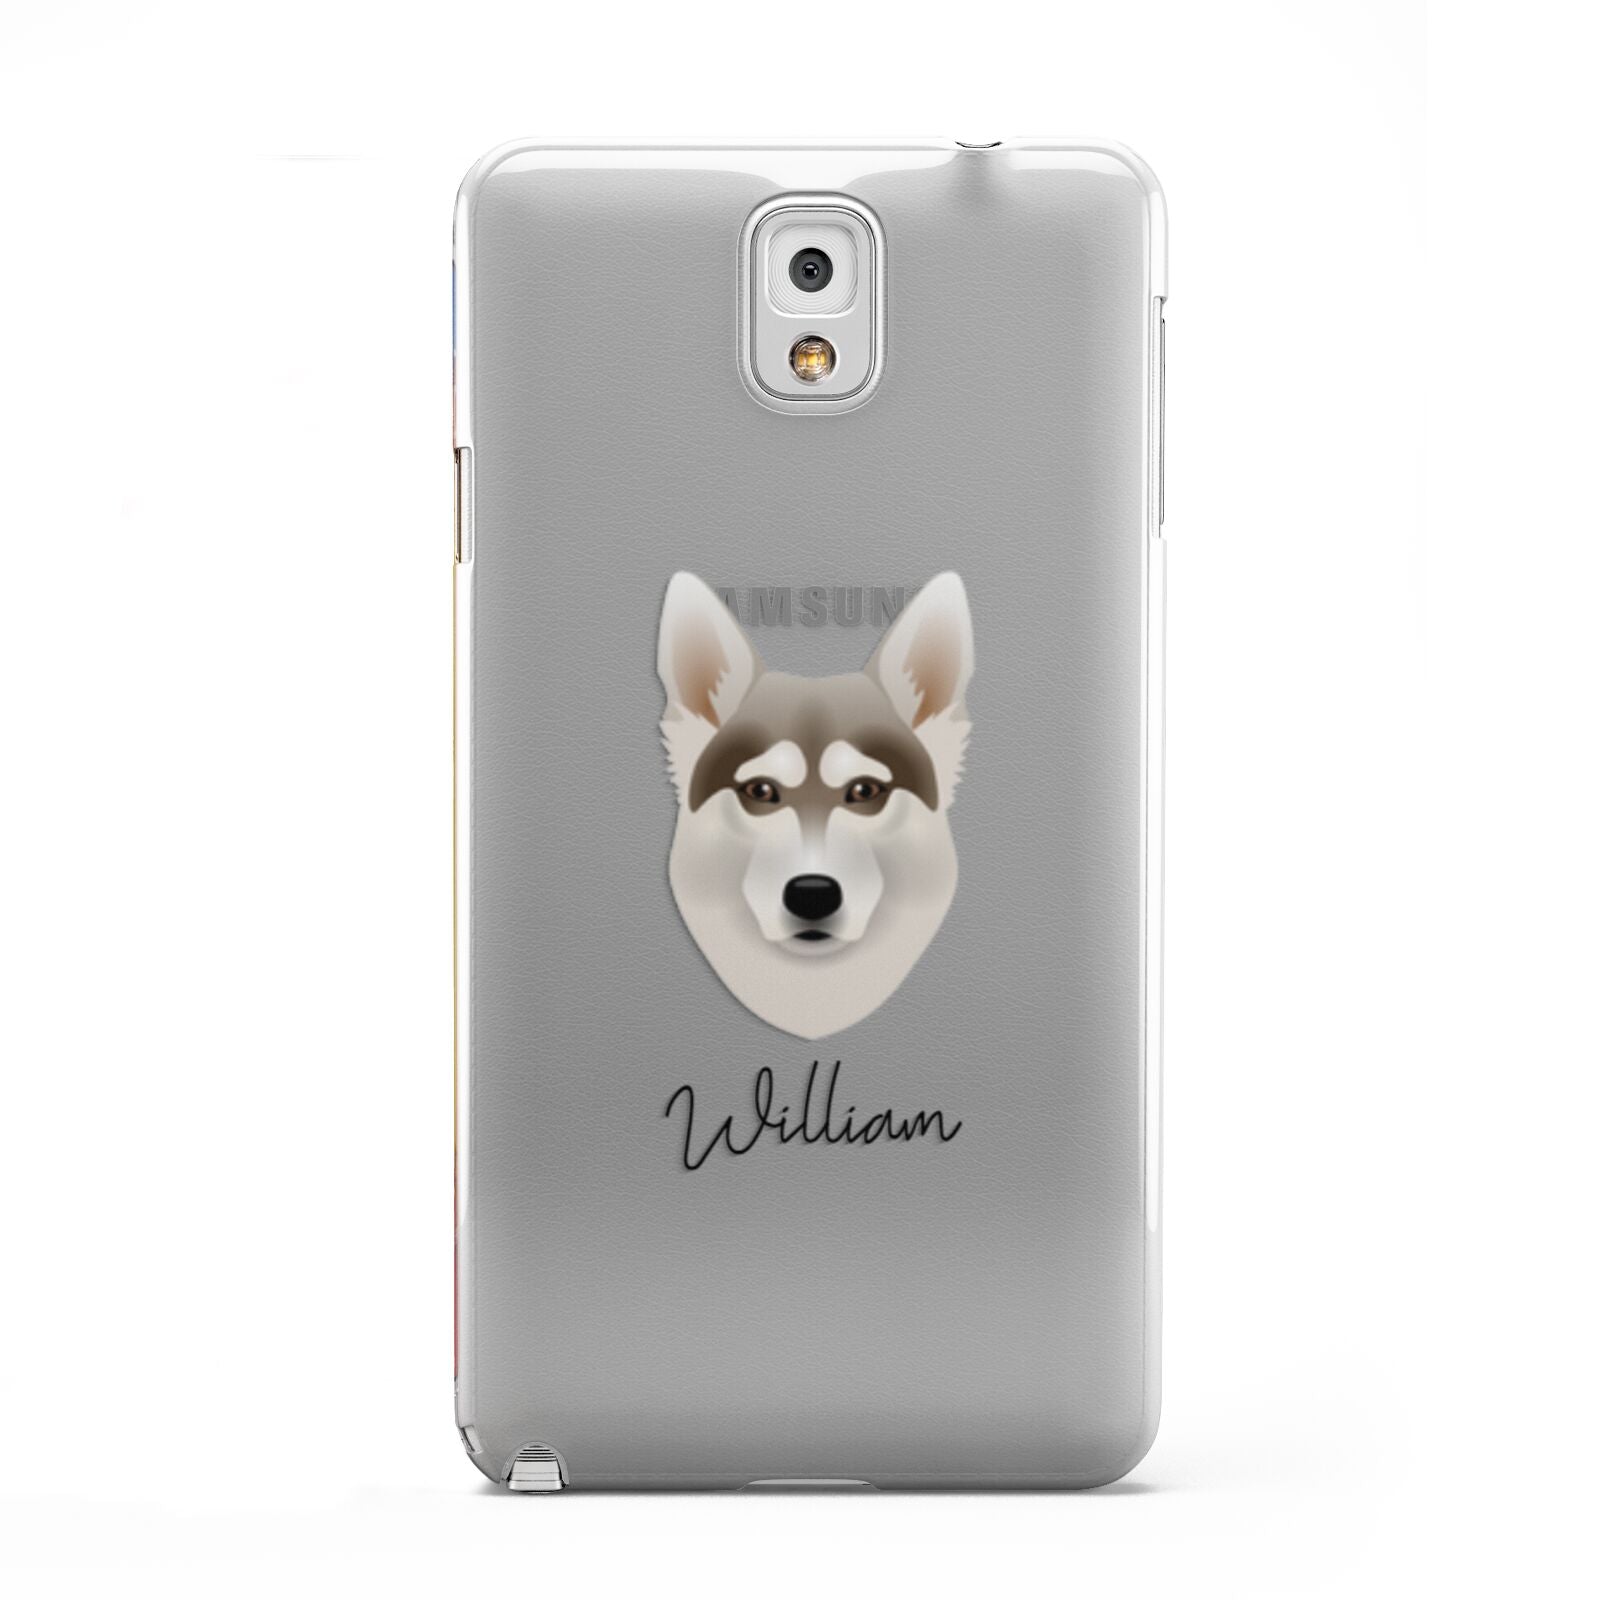 Northern Inuit Personalised Samsung Galaxy Note 3 Case